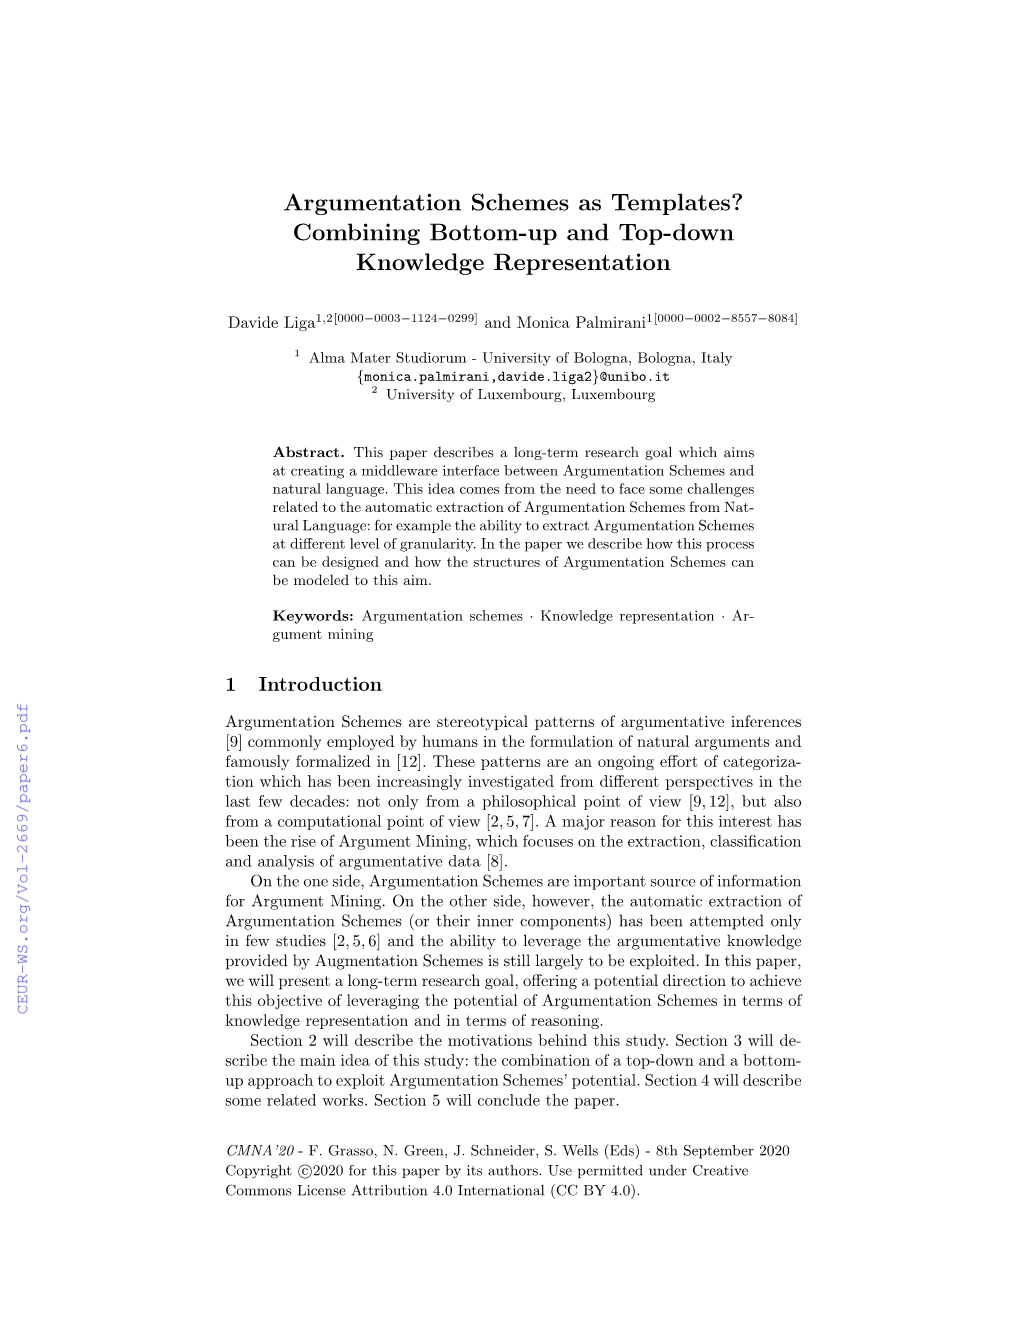 Argumentation Schemes As Templates? Combining Bottom-Up and Top-Down Knowledge Representation